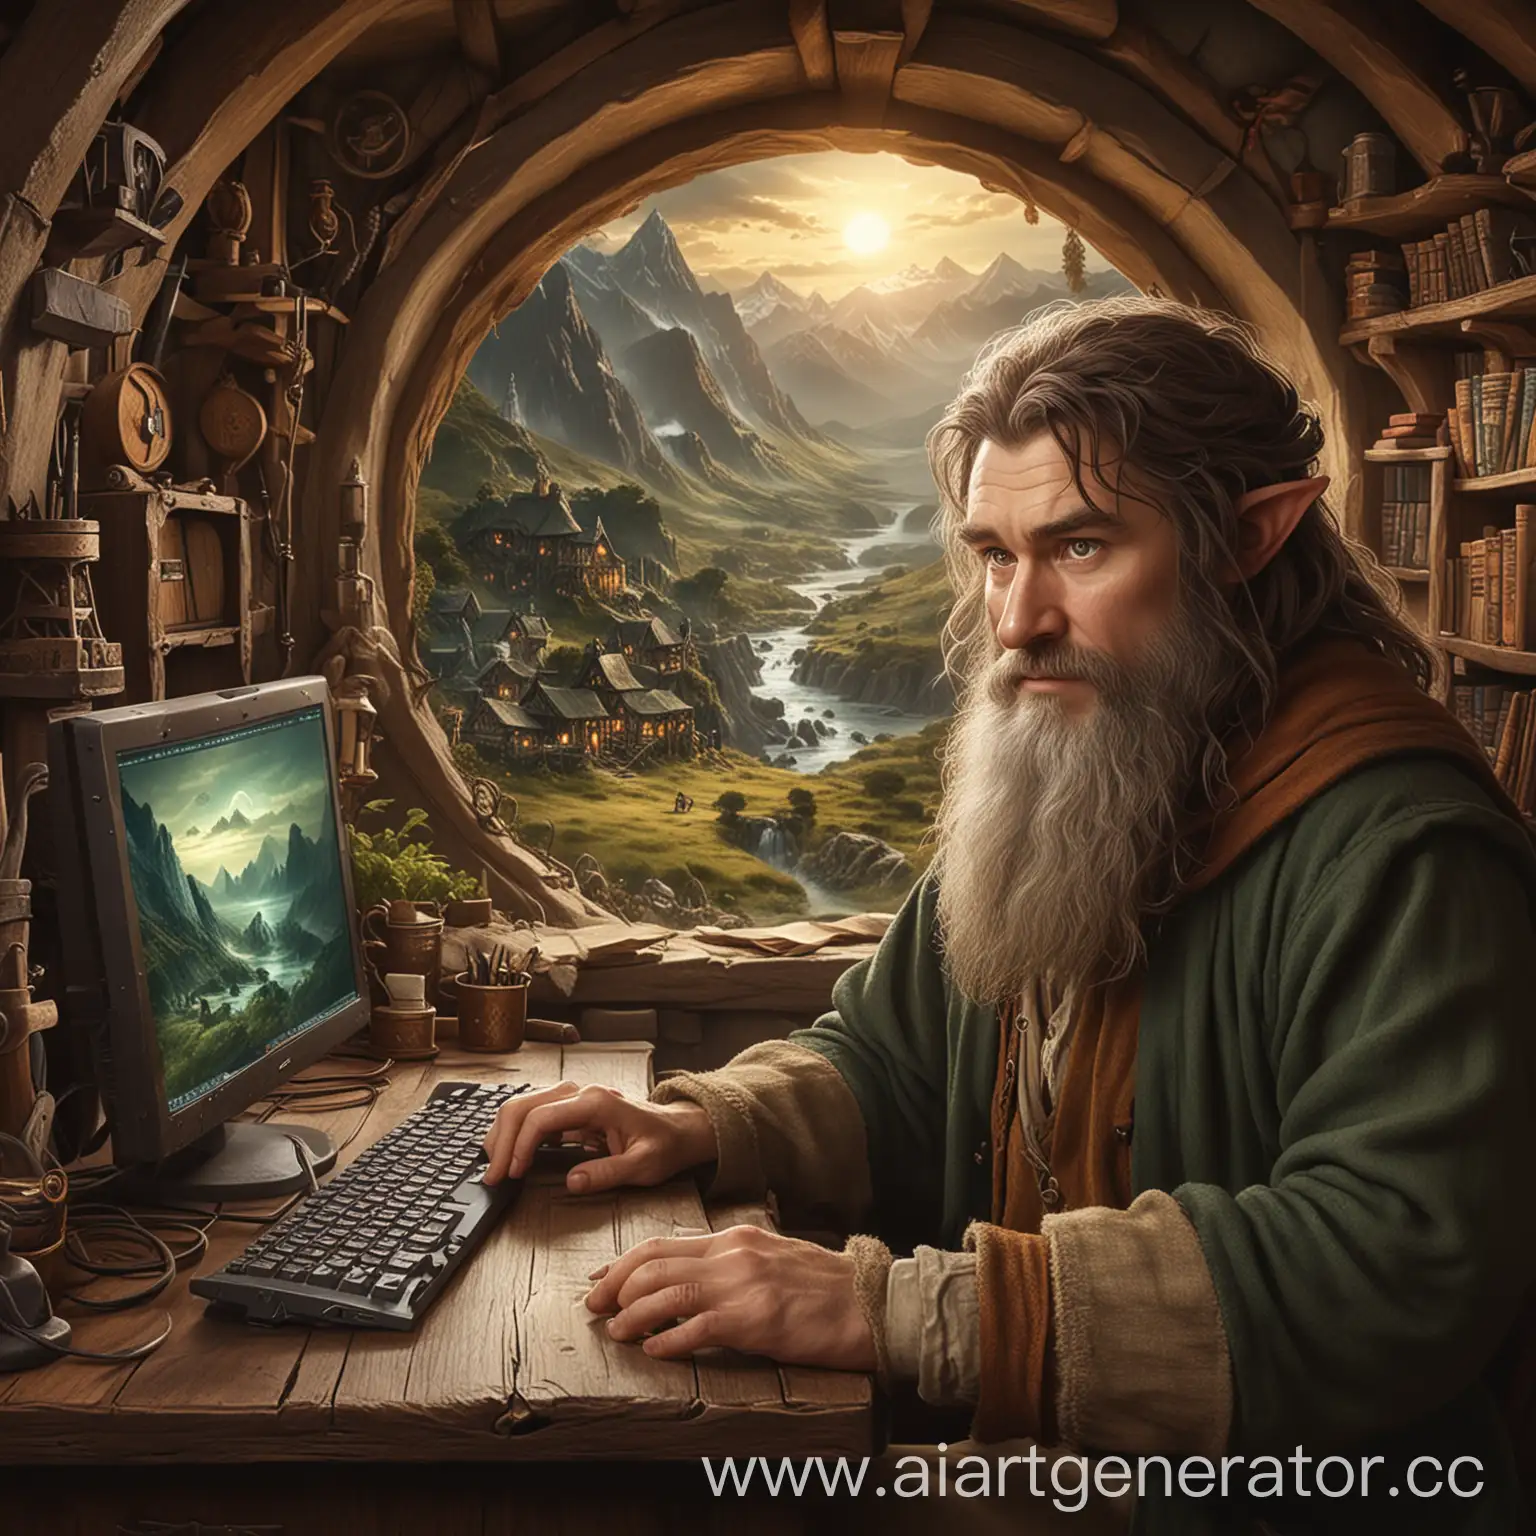 Hobbit-Using-Computer-in-Middleearth-Style